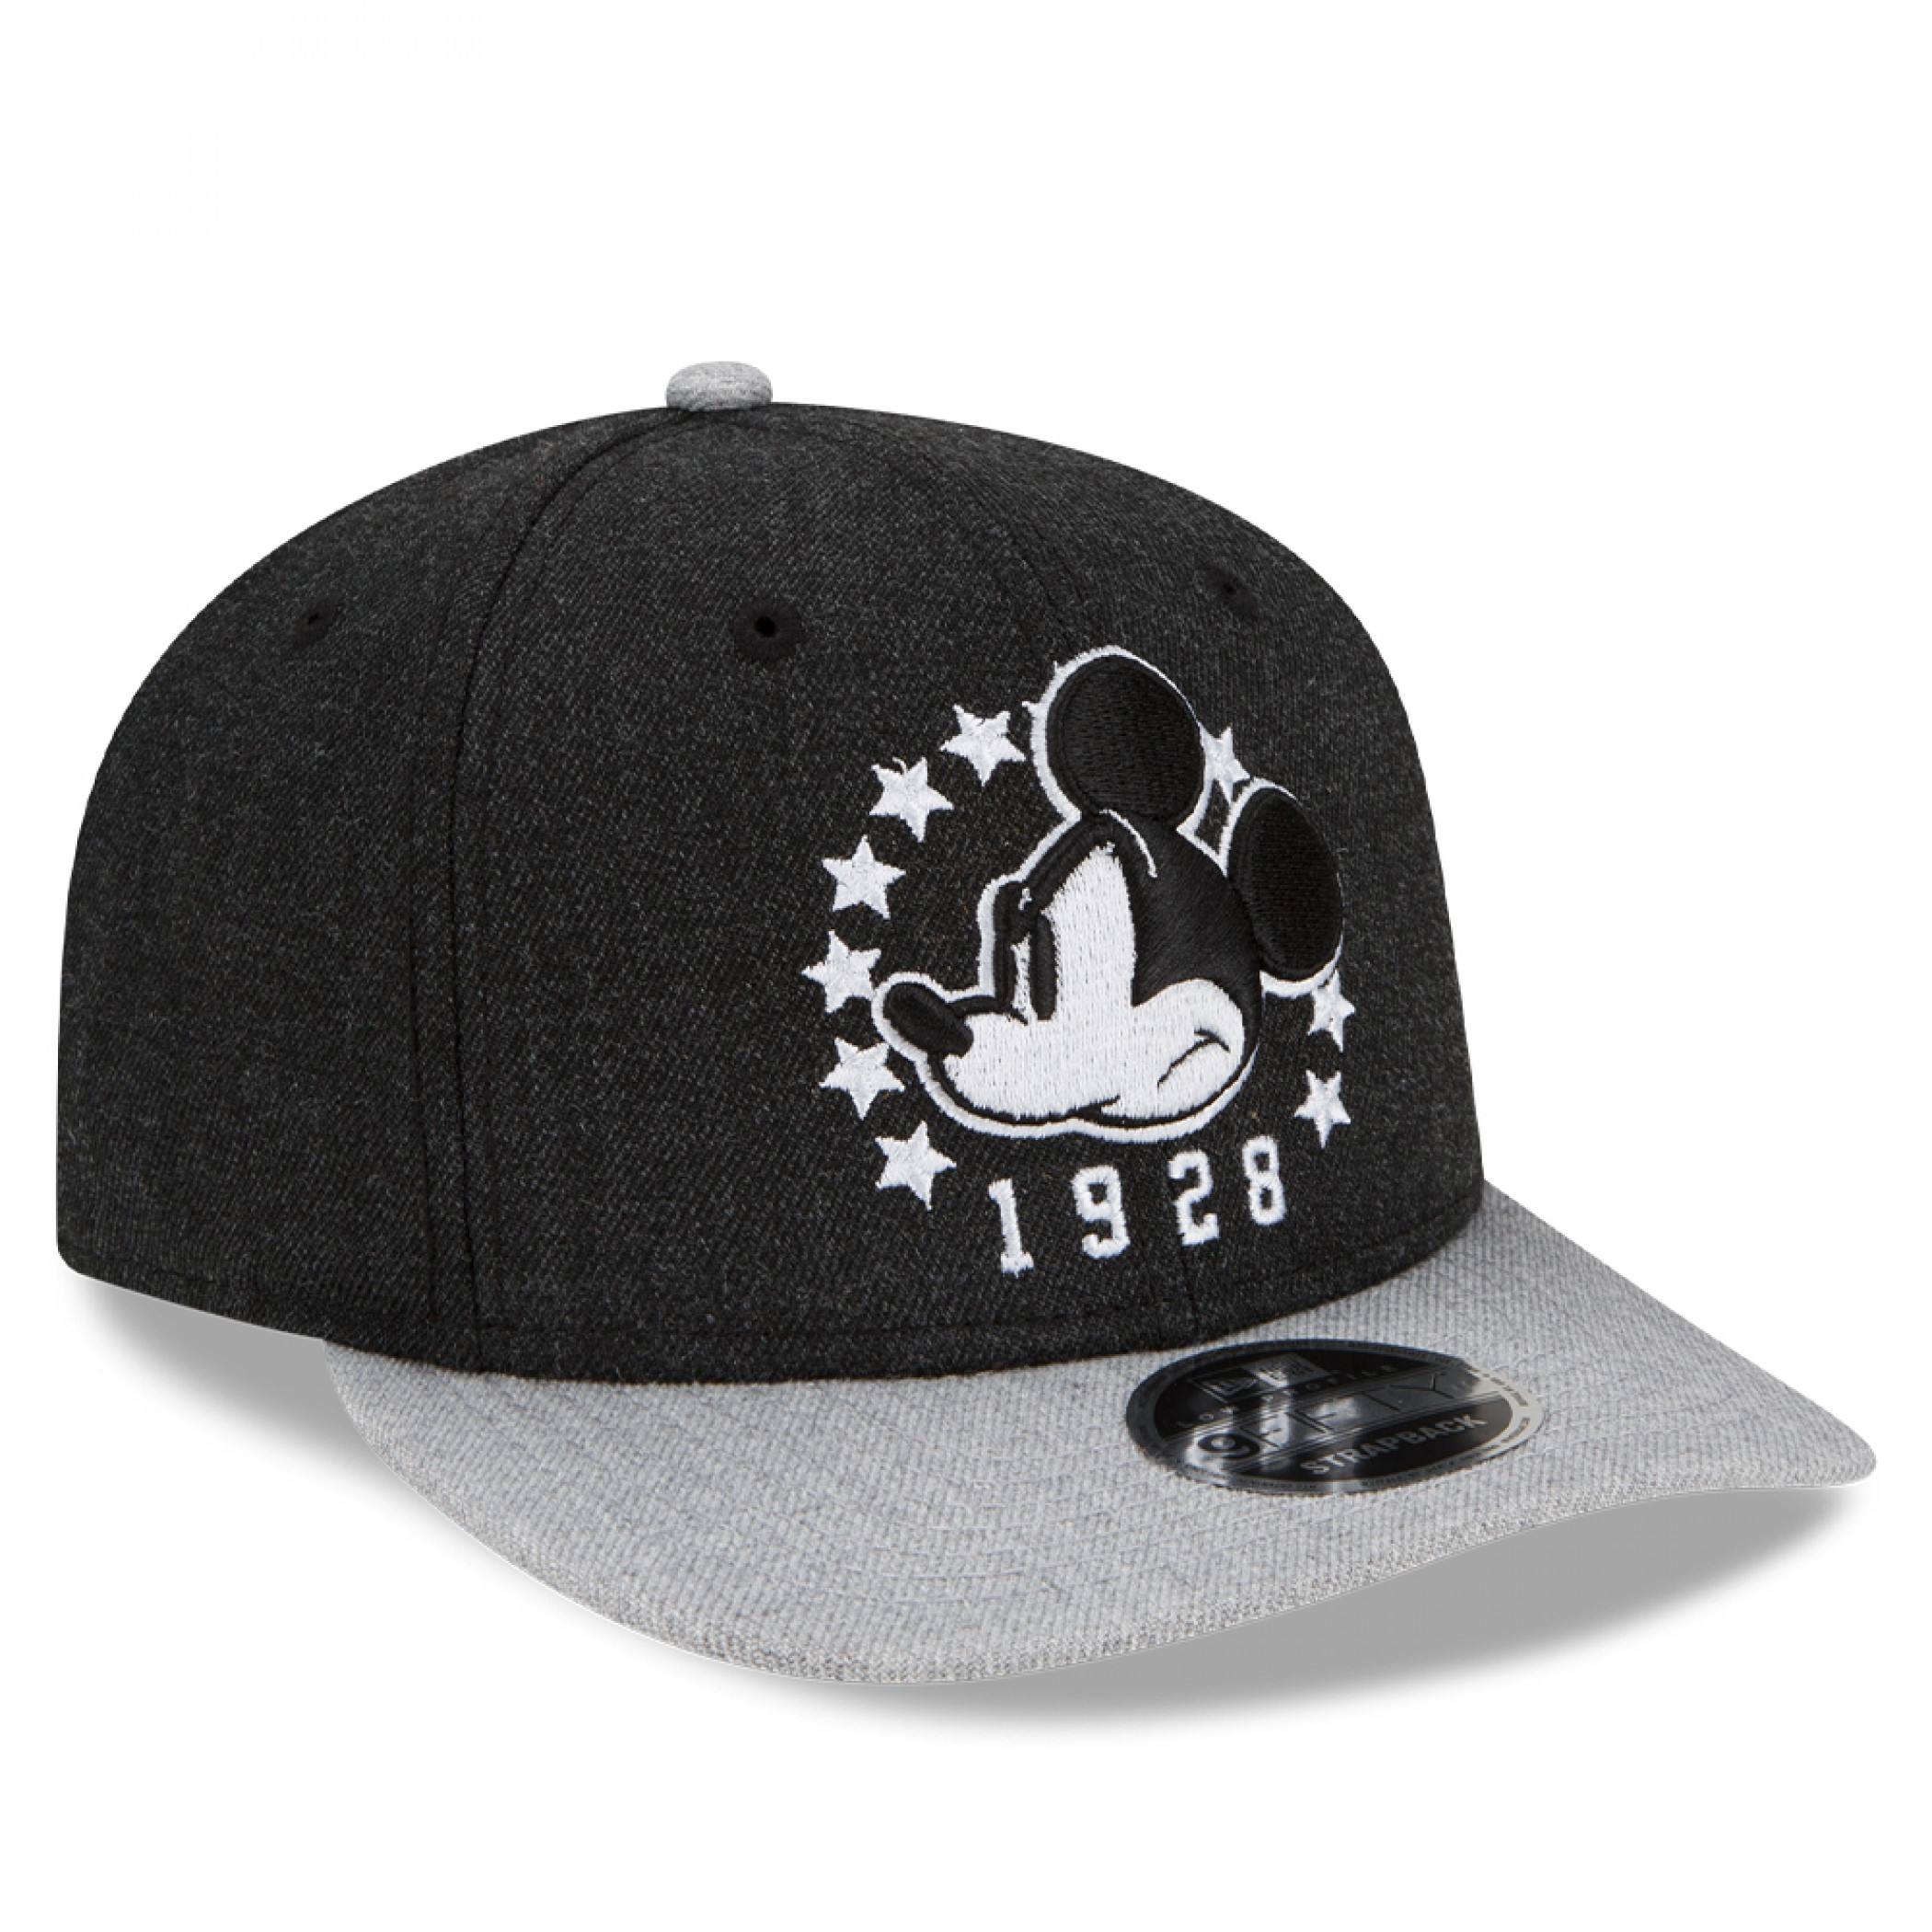 Mickey Mouse Gold Brim New Era 9Fifty Adjustable Hat 